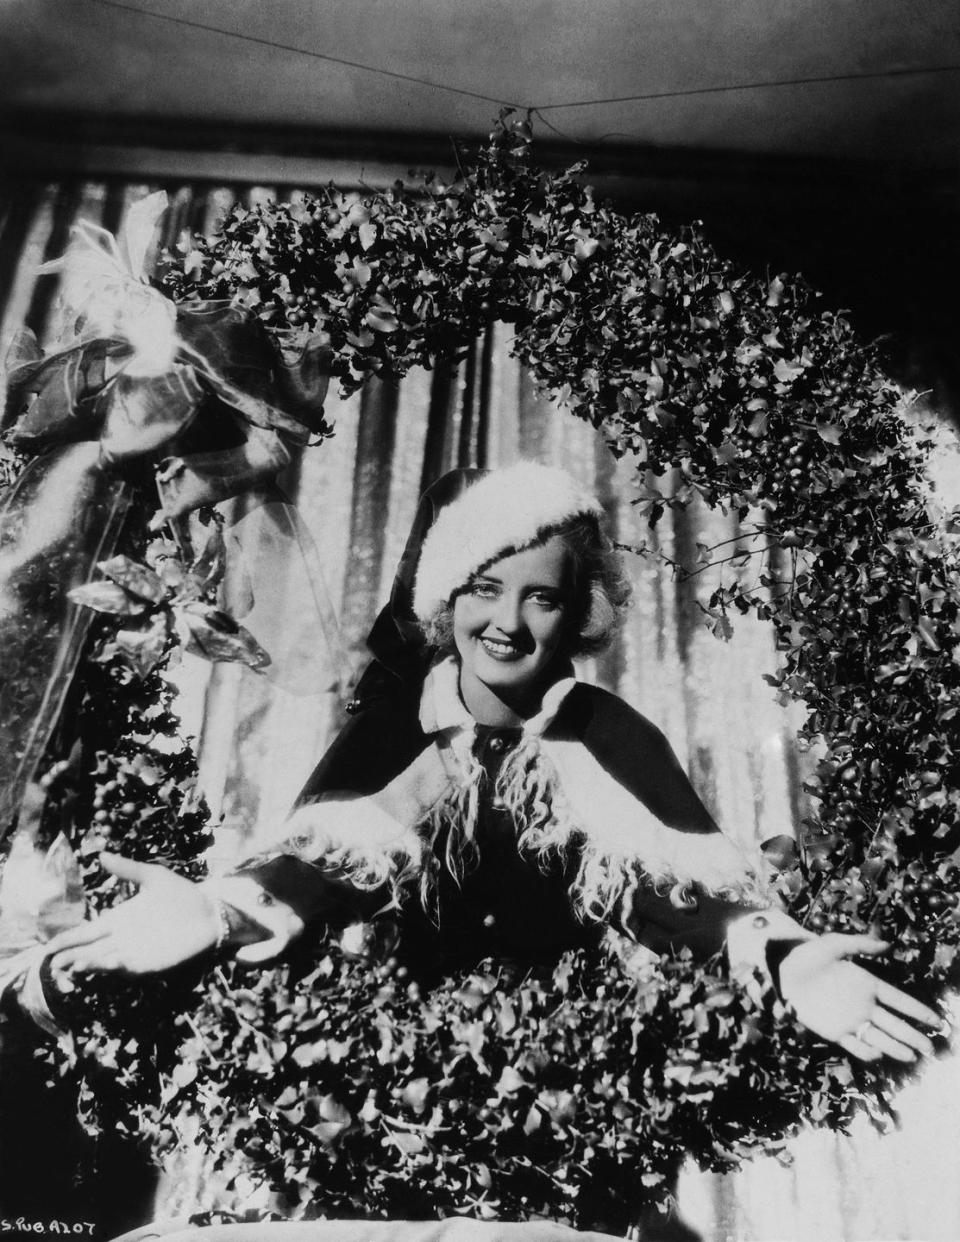 <p>Bette Davis wears a fur-trimmed cape and cap, just like Mrs. Claus herself, as she poses inside a giant wreath during holidays.</p>